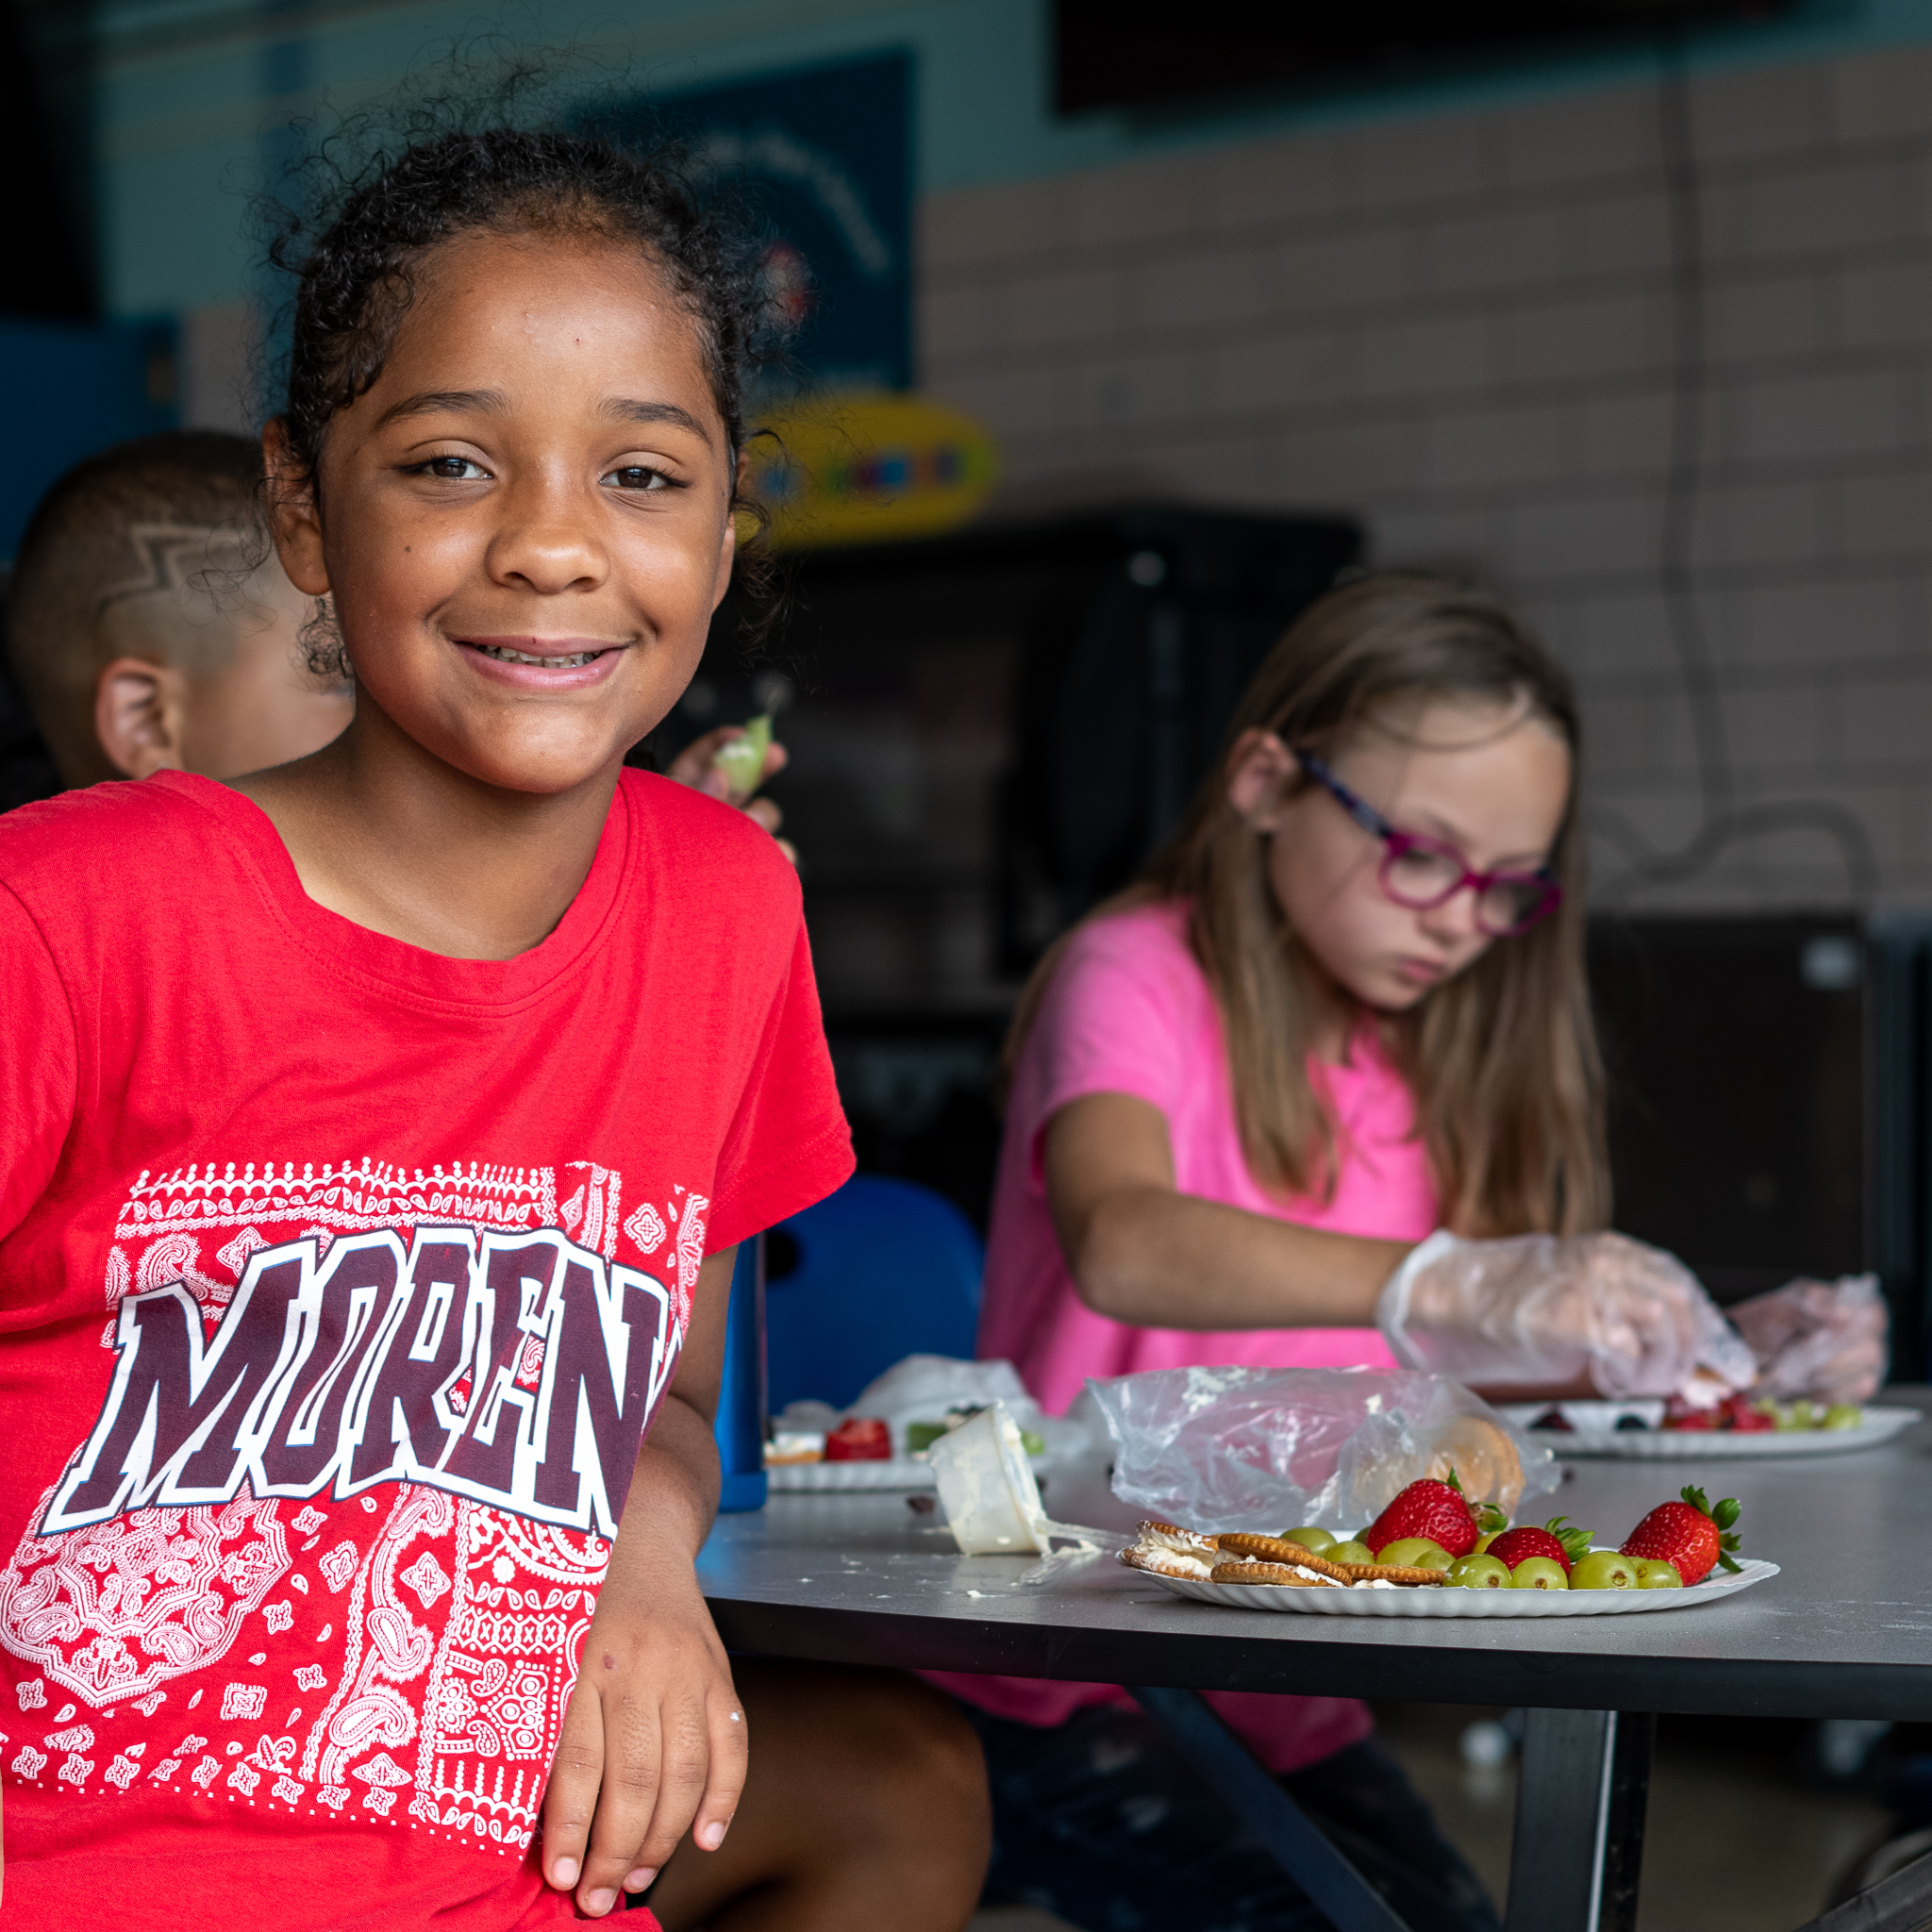 A smiling student next to a plate of fruit looking straight at the camera as other students behind her work on their plate.